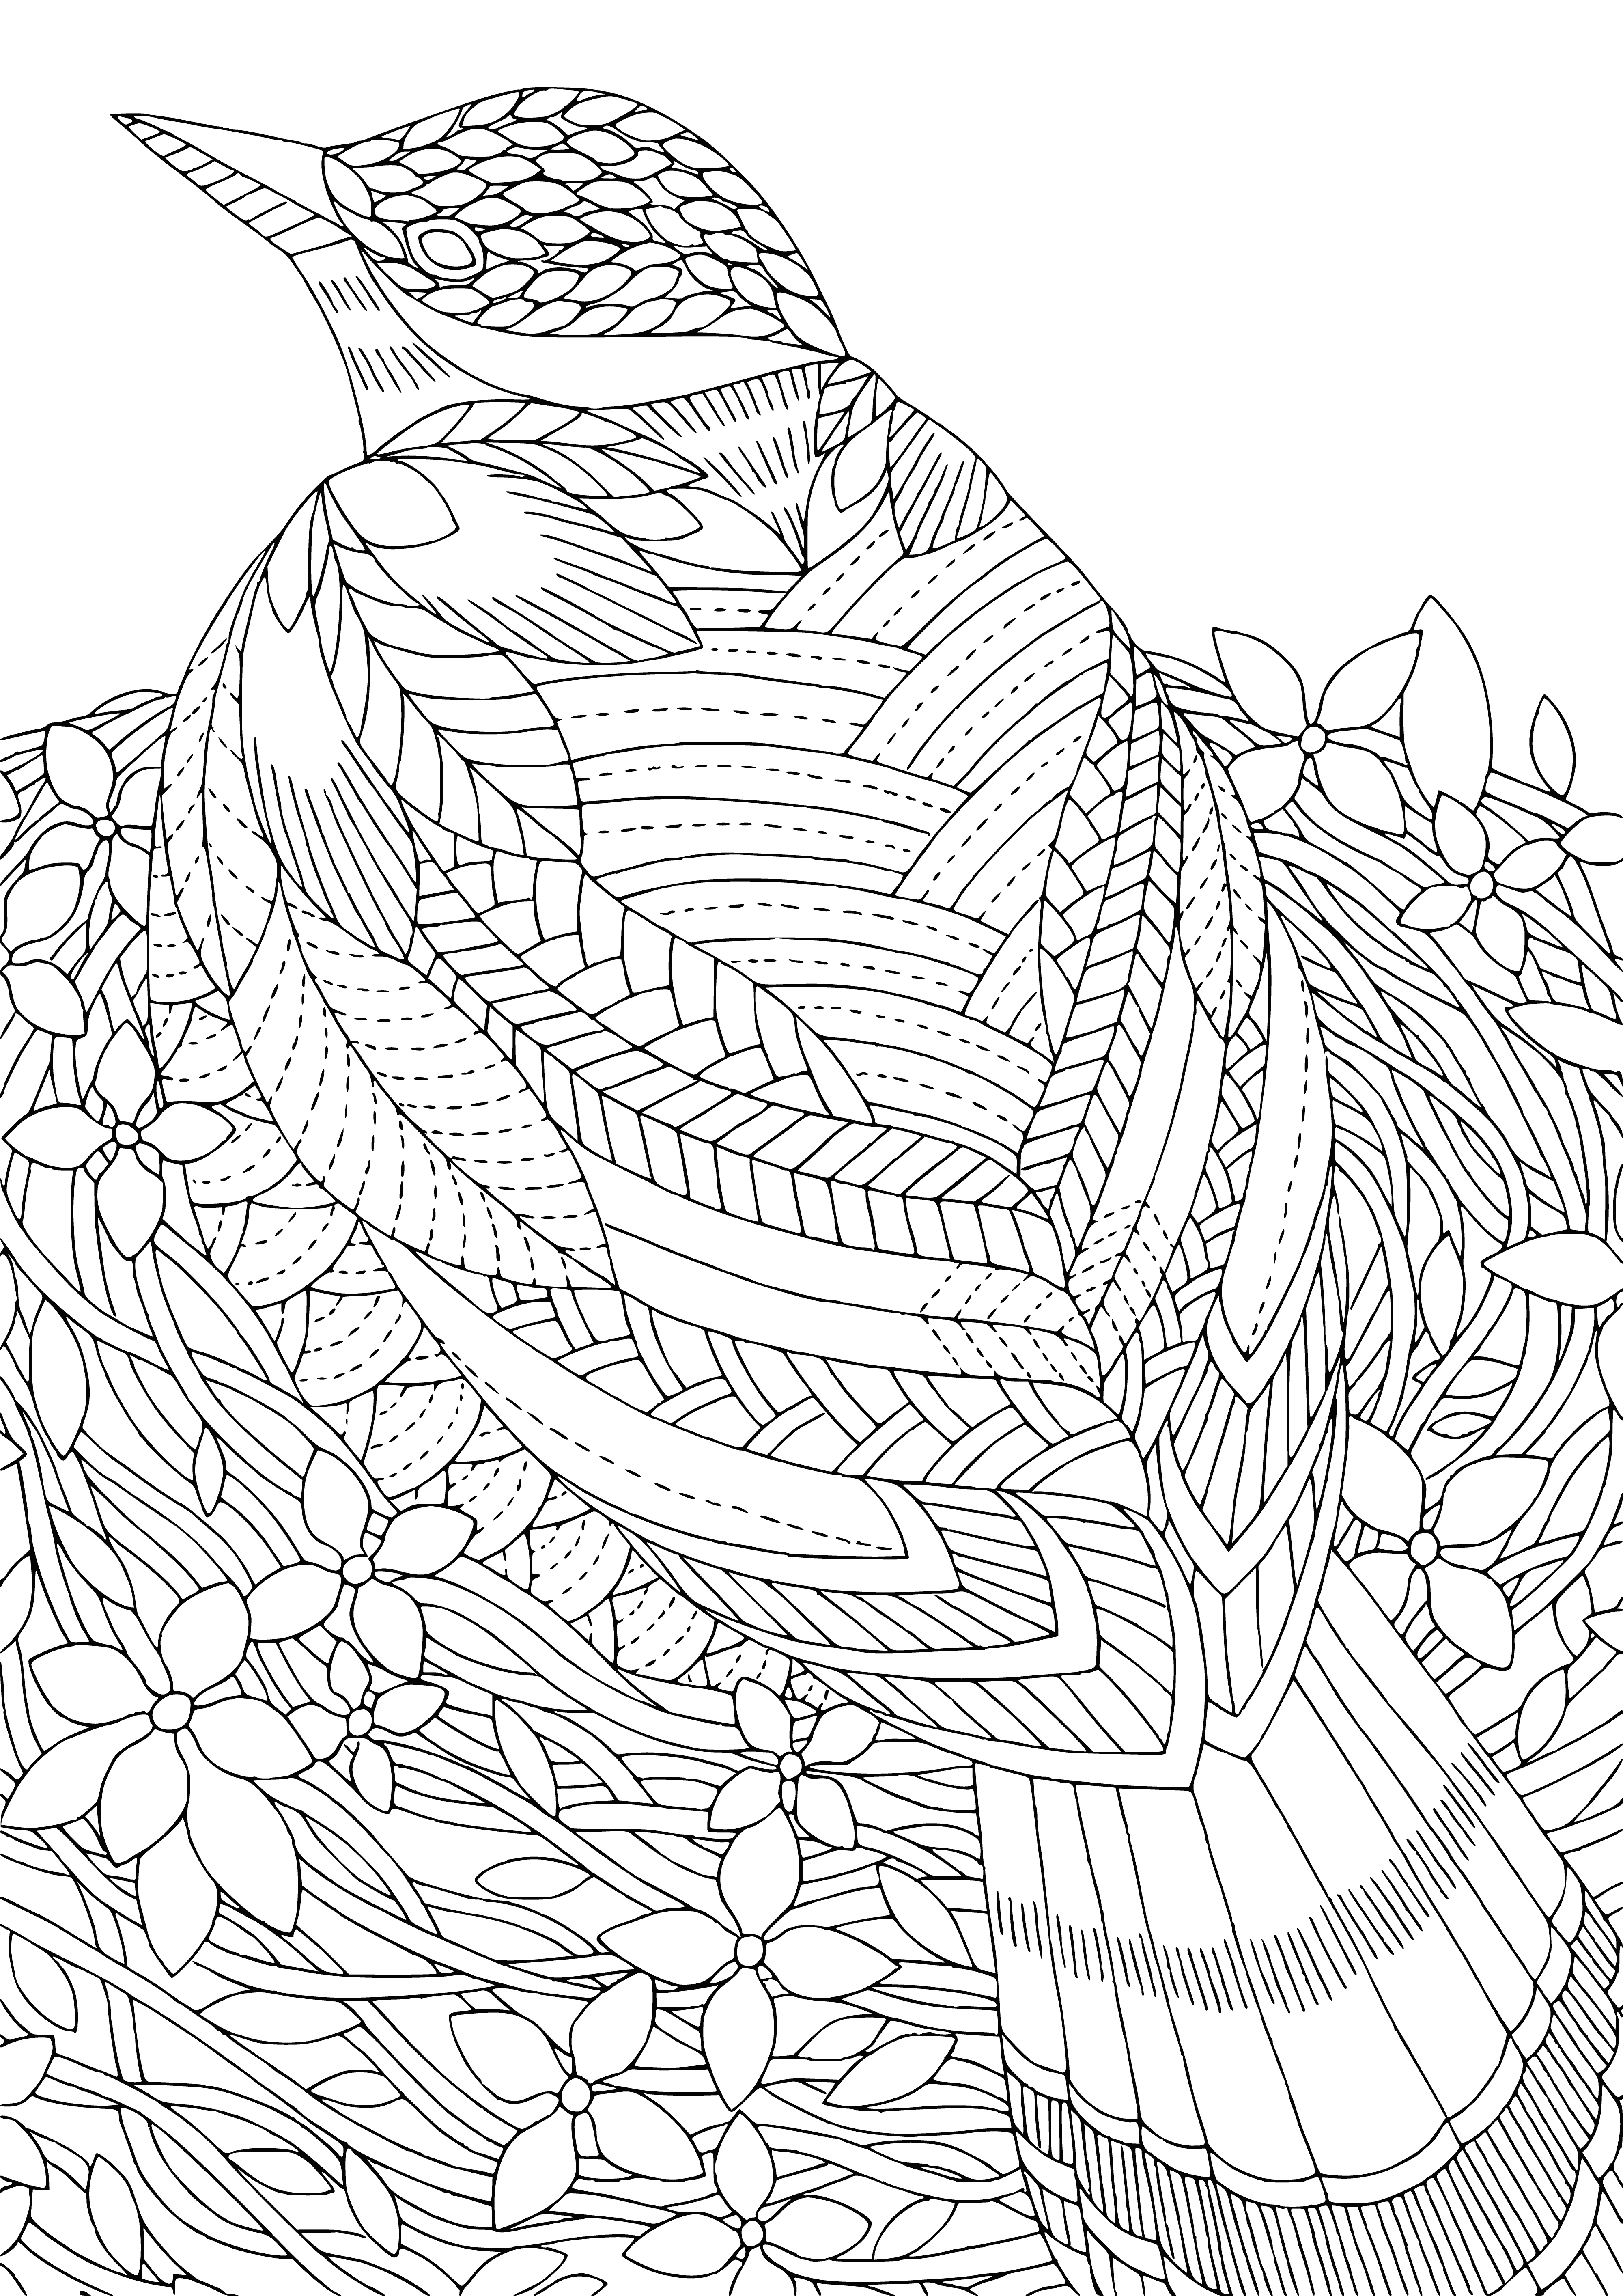 coloring page: Bird with yellow & green feathers in brown nest with green leaves. #coloring